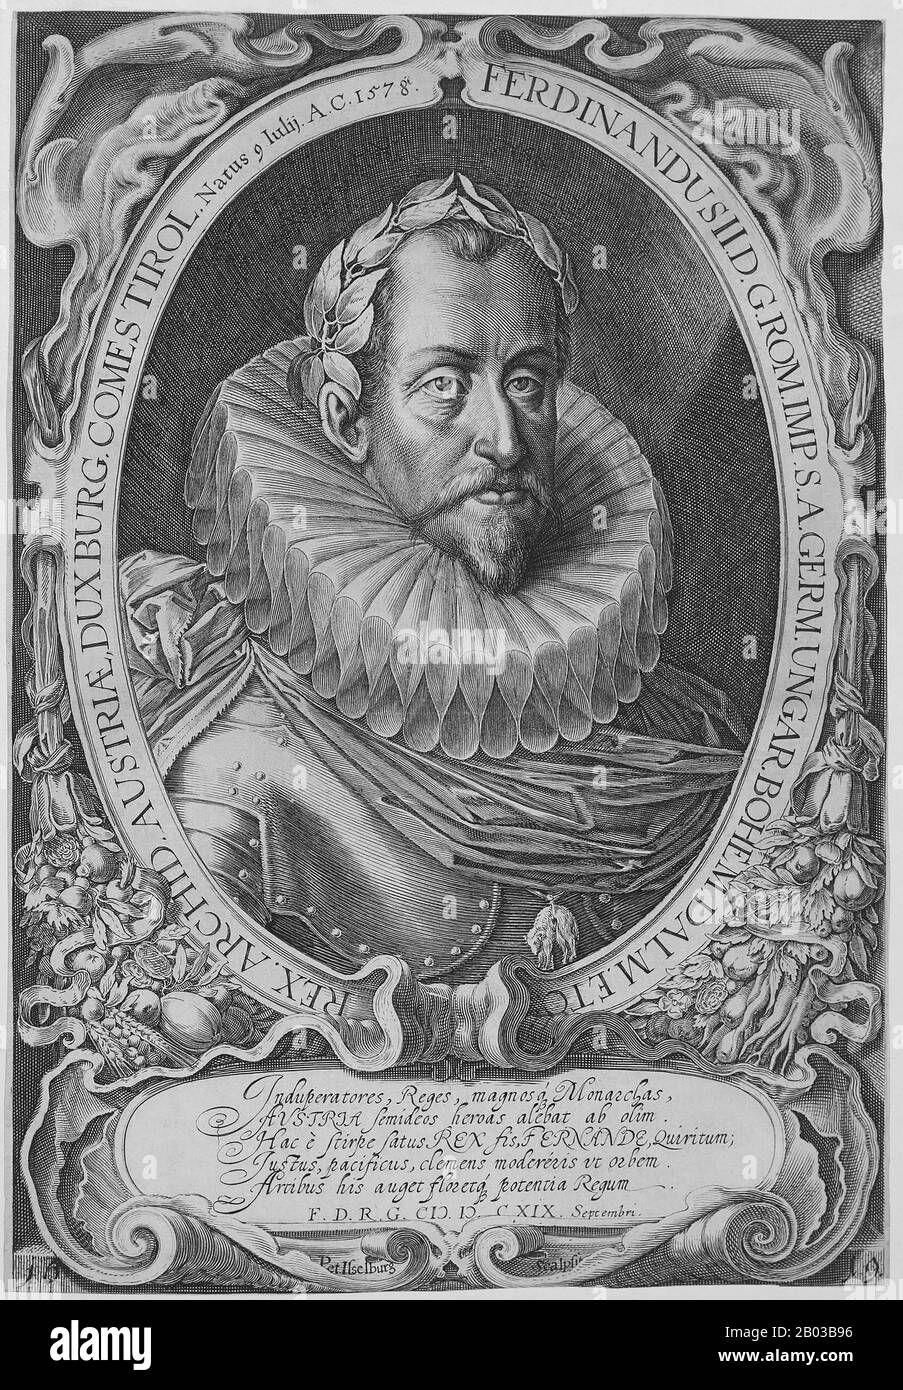 Ferdinand II (1578-1637) was the son of Charles II, Archduke of Austria, and grandson of Emperor Ferdinand I. Ferdinand was part of a Catholic faction opposed to his cousin, Emperor Matthias, who was more tolerant to Protestantism. He became King of Bohemia in 1617, King of Hungary in 1618, and ascended to Holy Roman Emperor in 1619 after his cousin's death. Stock Photo